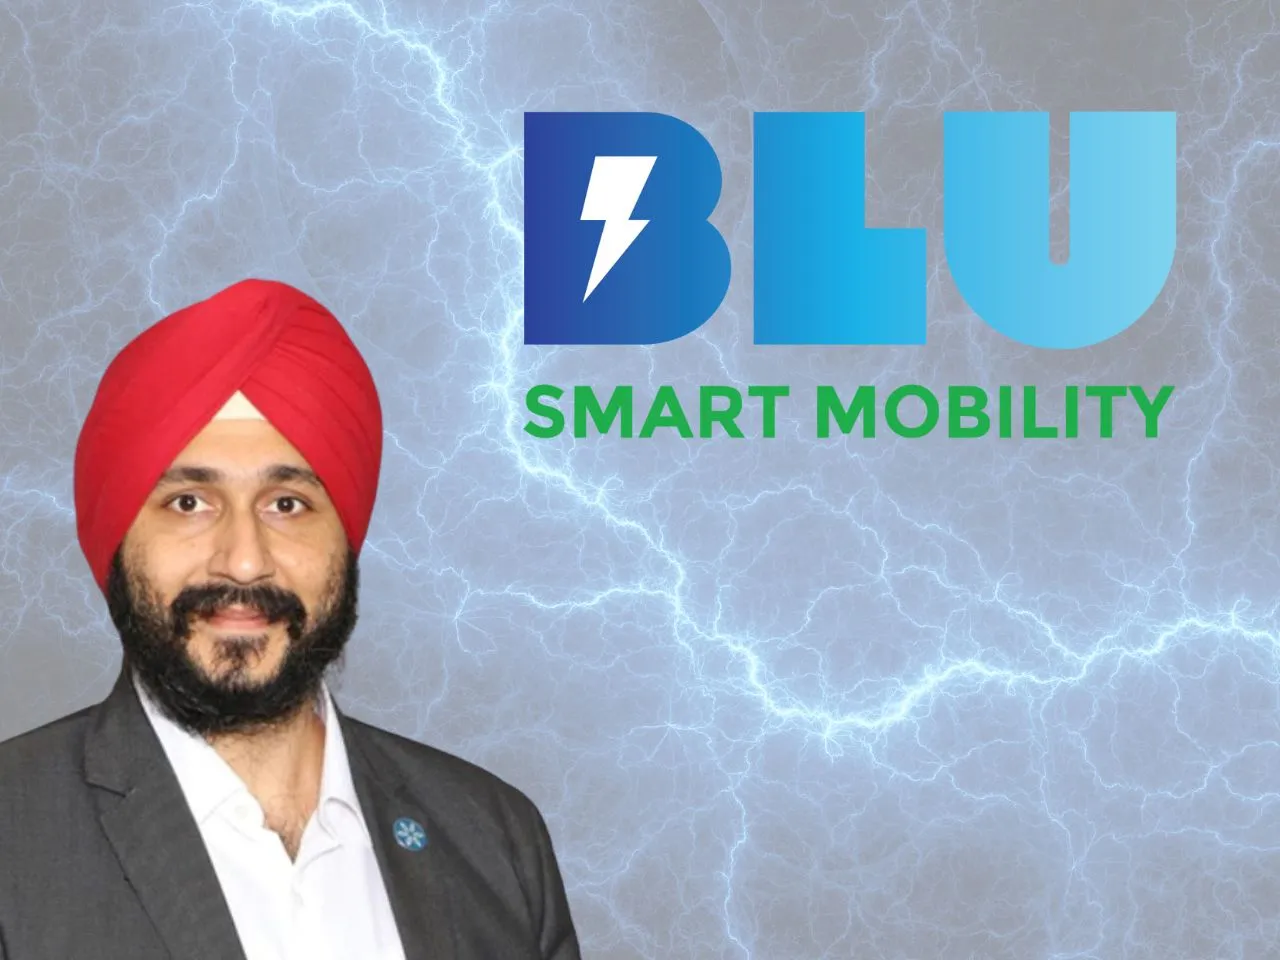 BluSmart Mobility Raises $42 Mn Funding in April, Reveals The Founder!